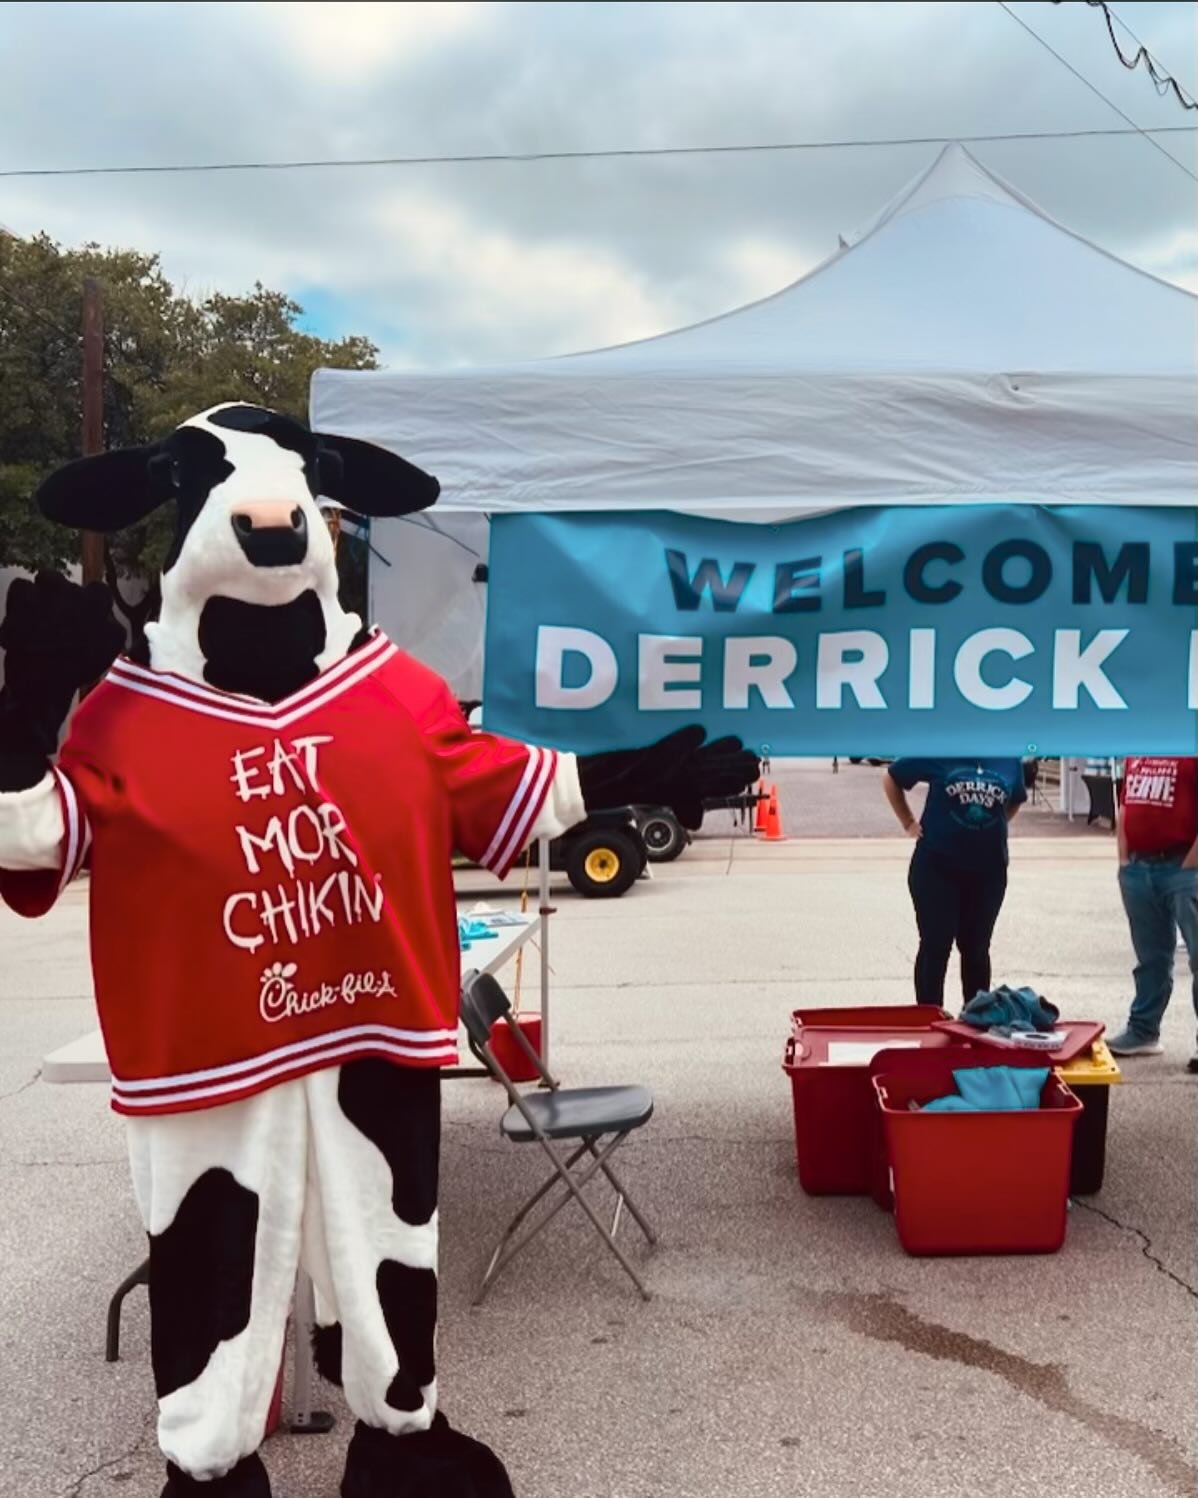 😴😴Two more sleeps til we see you at Derrick Days&hellip;.we can&rsquo;t wait to see everyone. Here are a few memories from last year. 

😍Check out our menu on the last slide.